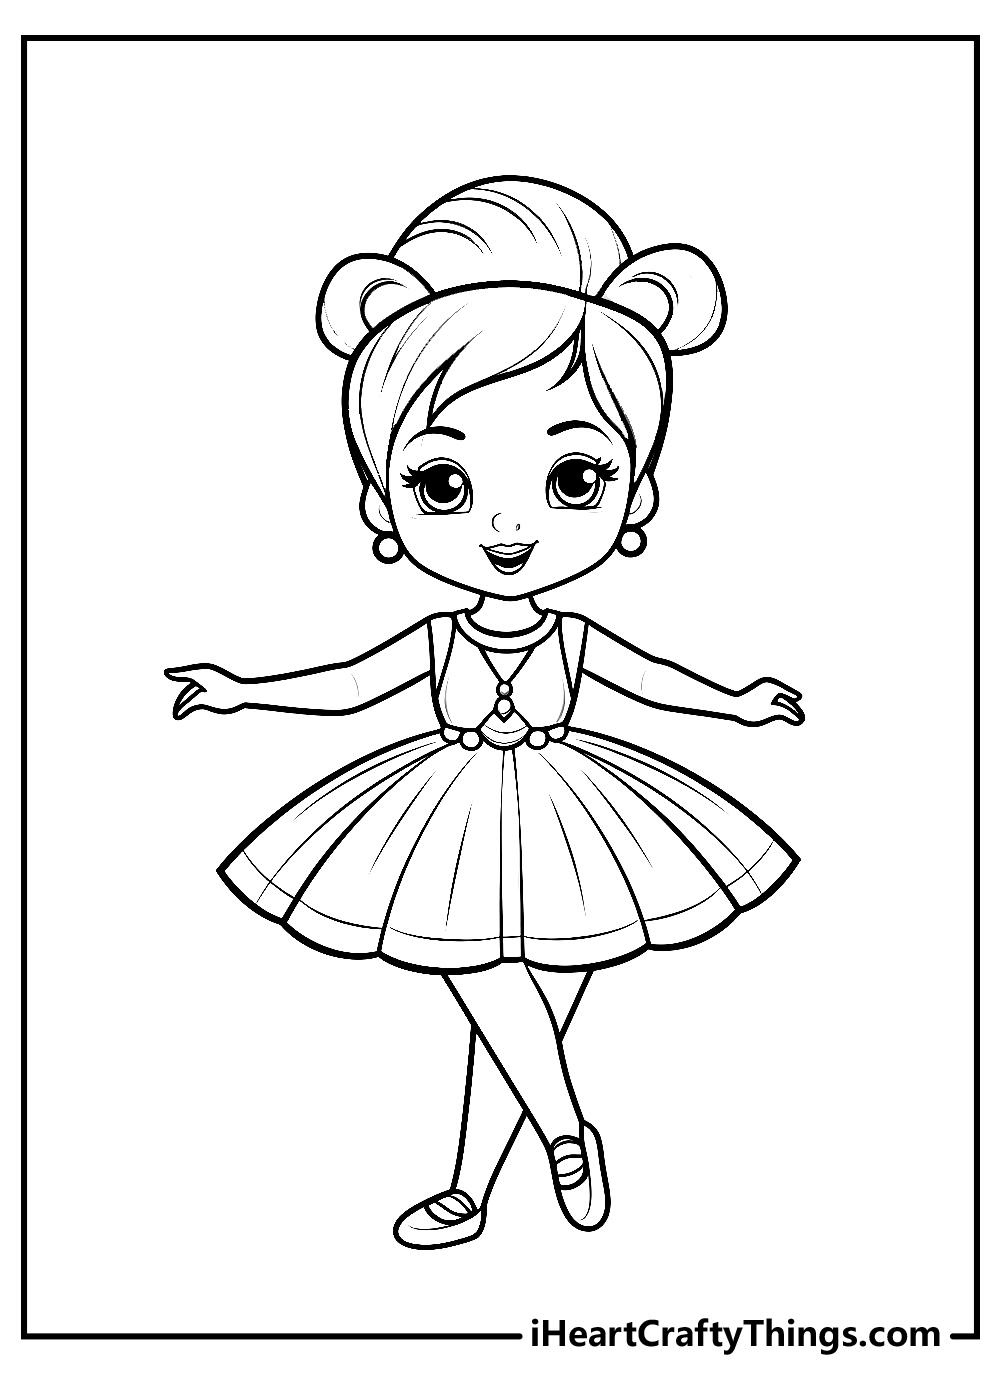 Ballerina coloring pages free printables